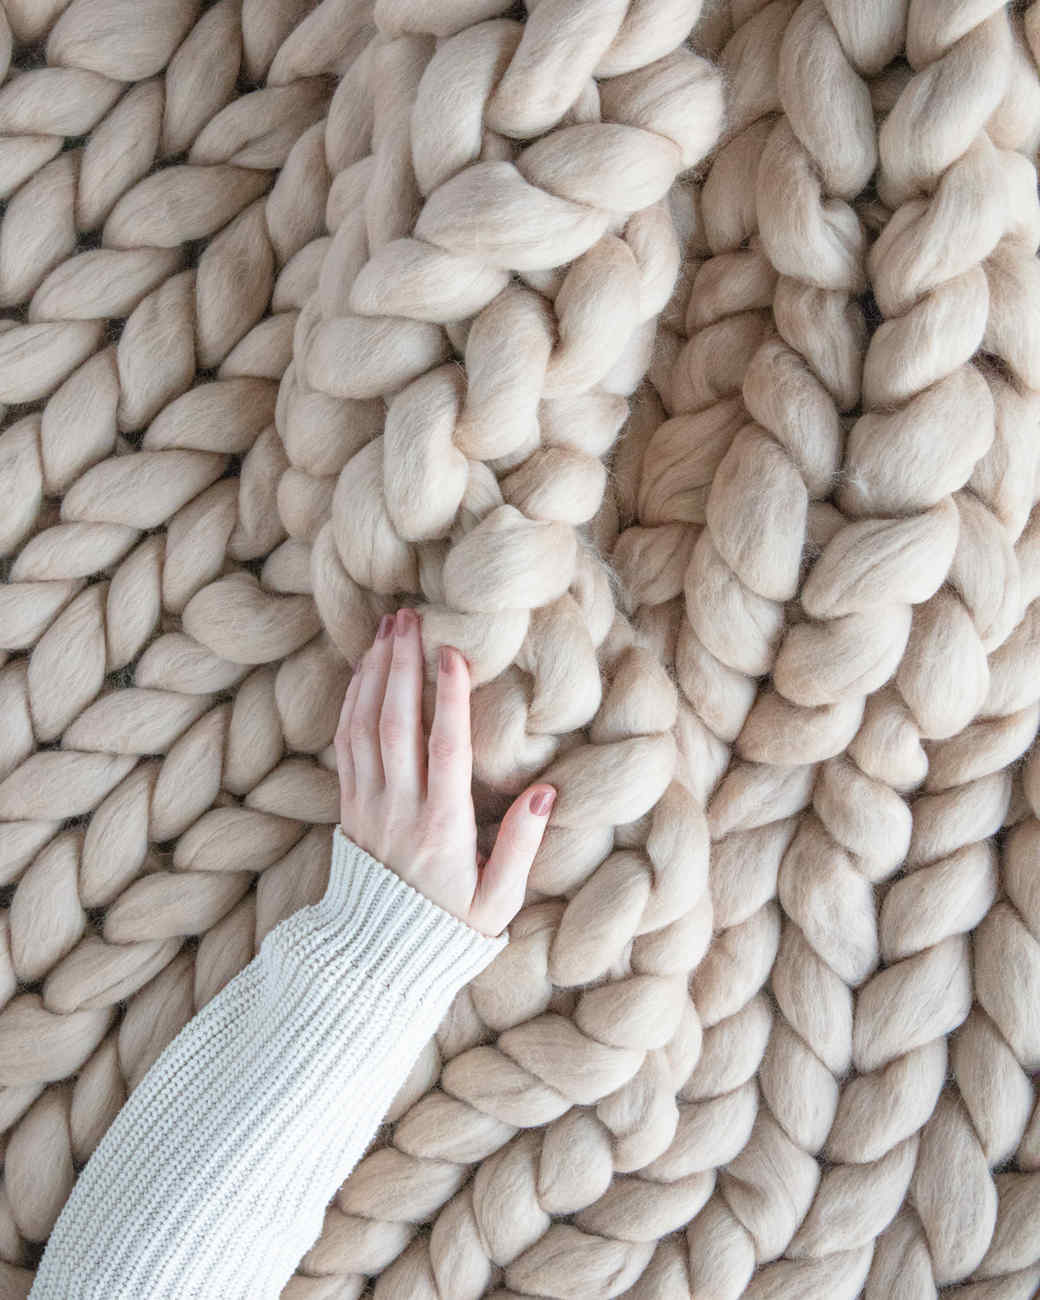 How to knit a chunky blanket with your hands